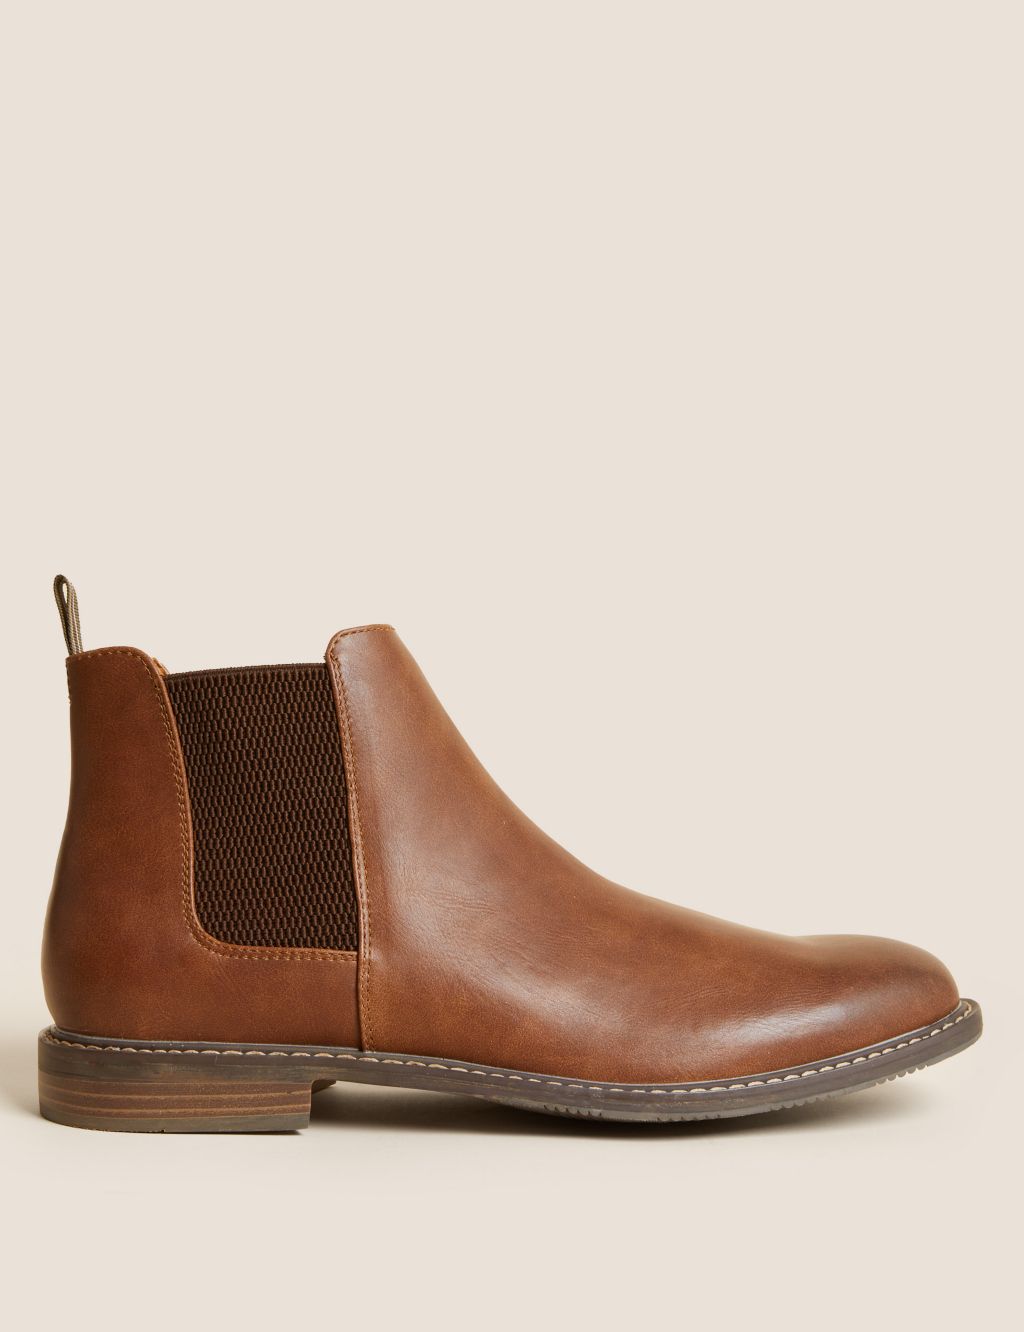 Pull-On Chelsea Boots image 1